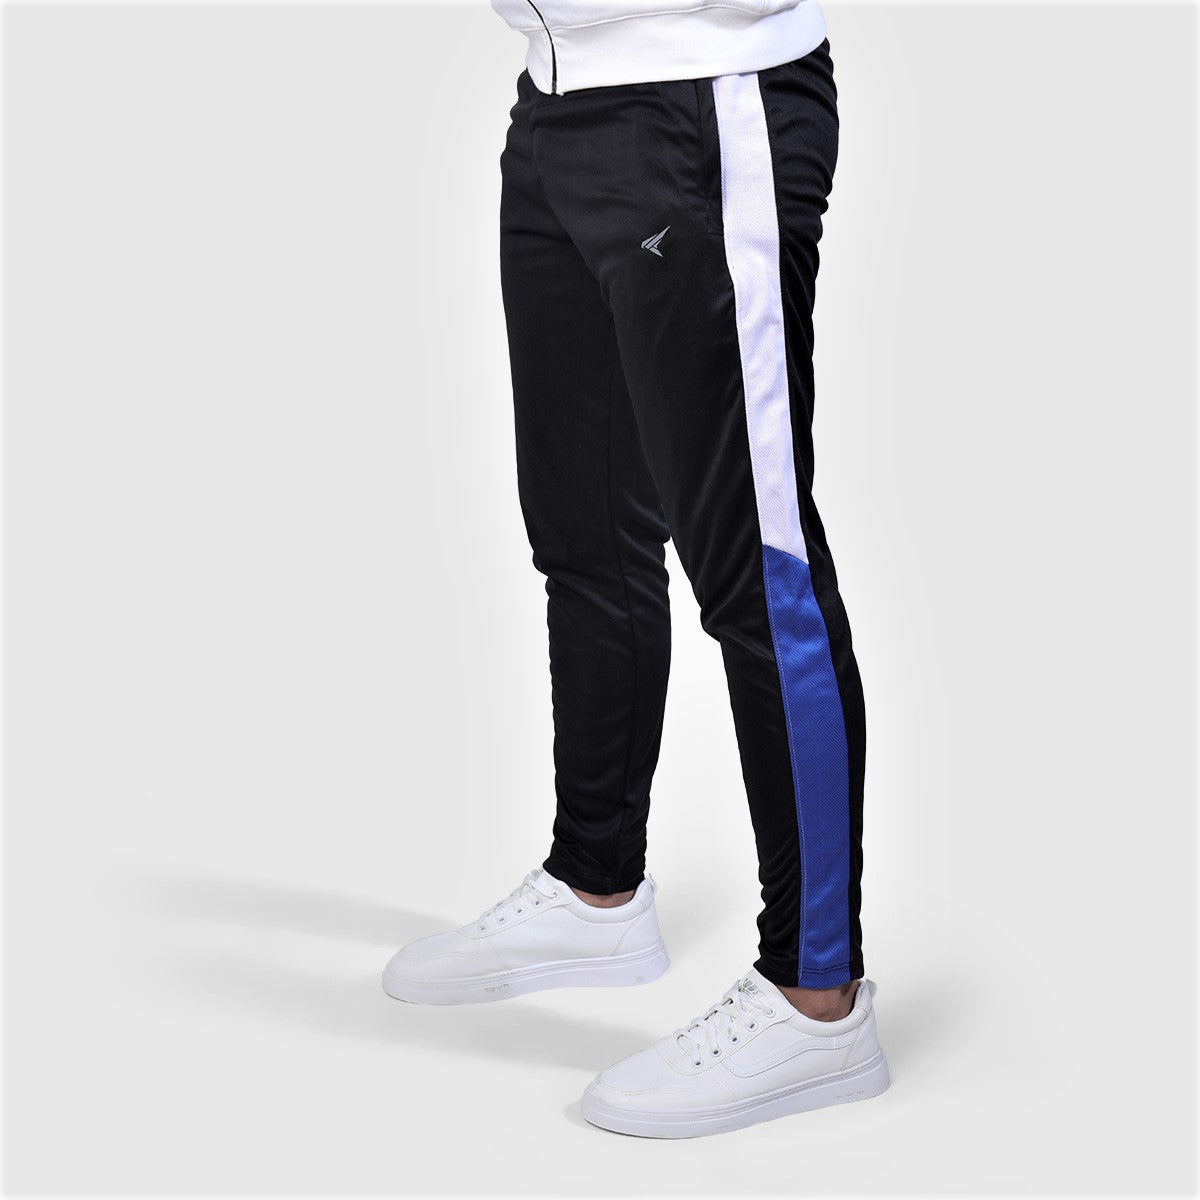 Black Trouser With White & Blue Panel